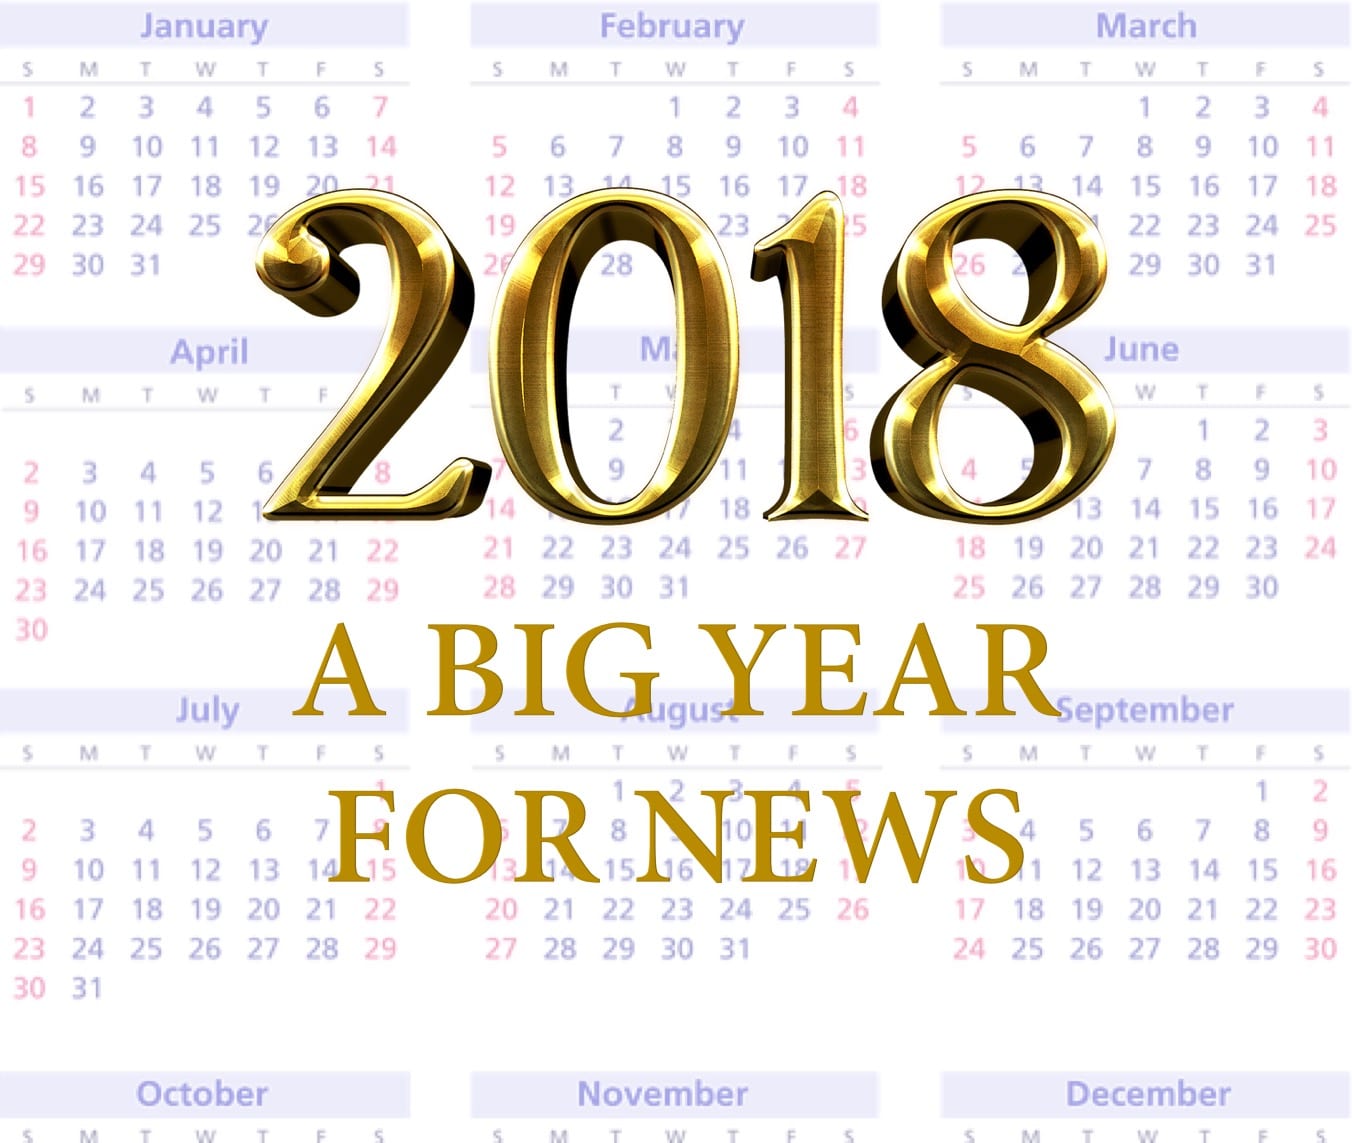 2018 in News